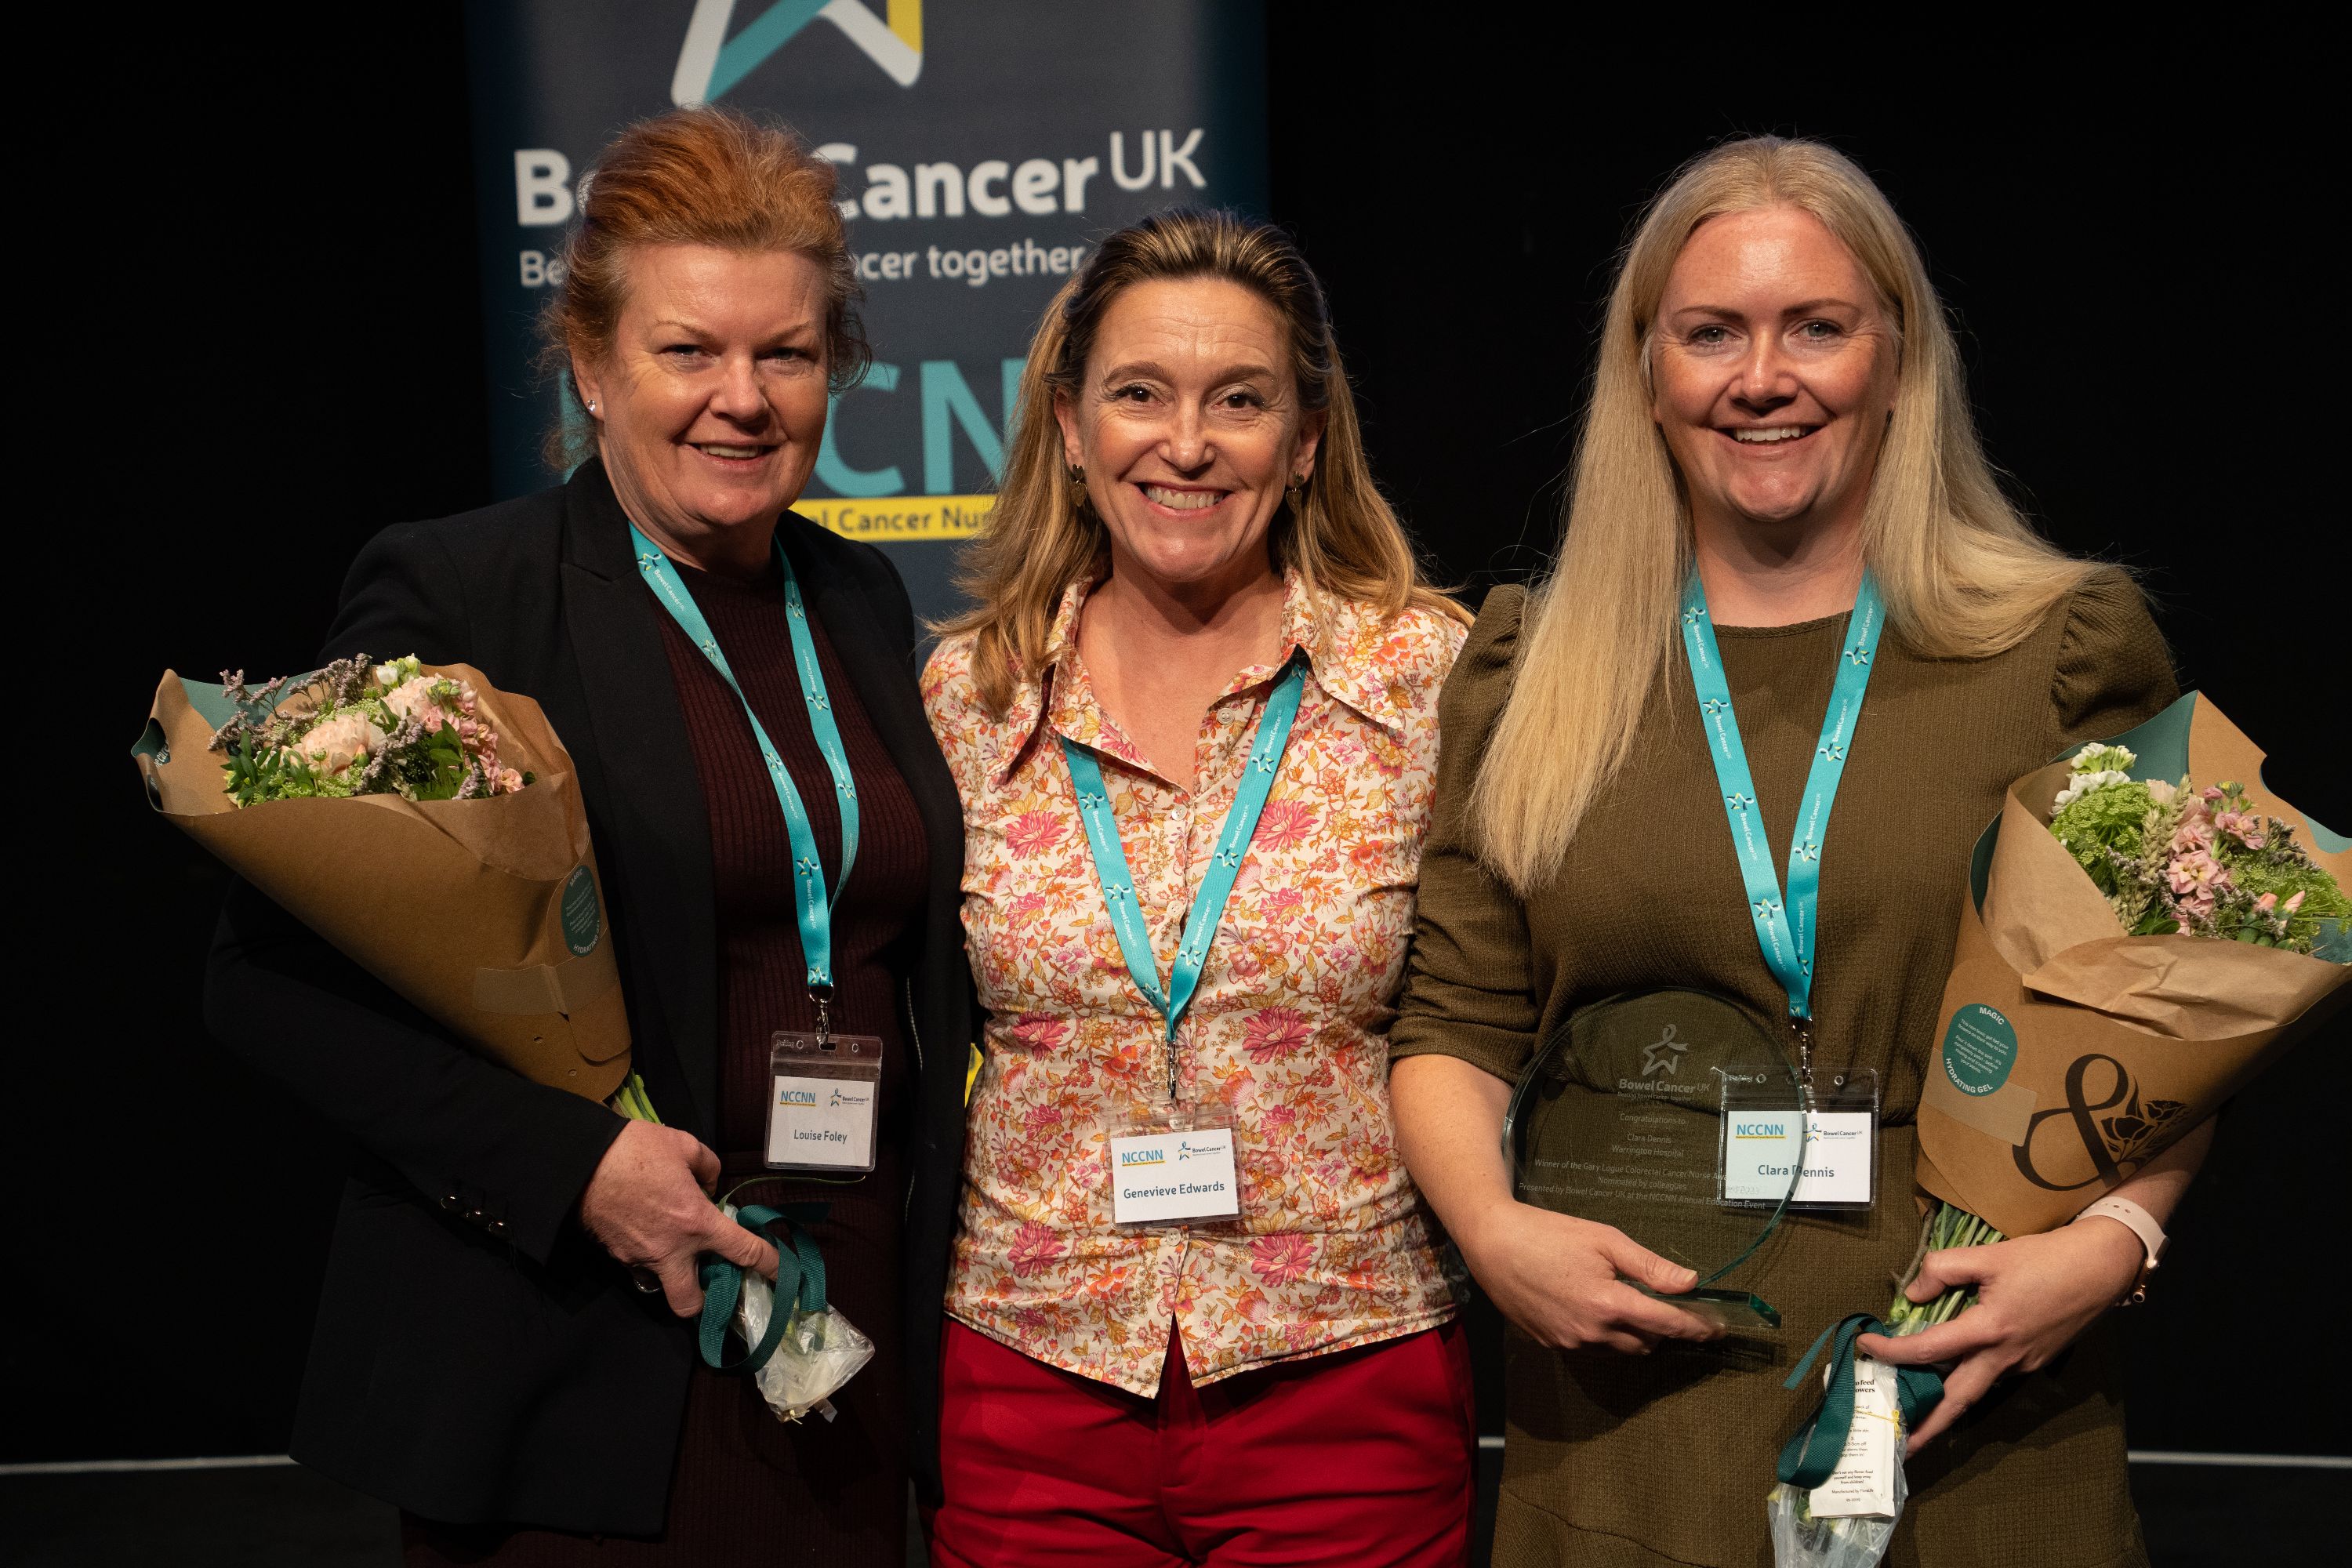 Louise and Clara with the Chief Executive of Bowel Cancer UK, Genevieve Edwards who presented the awards